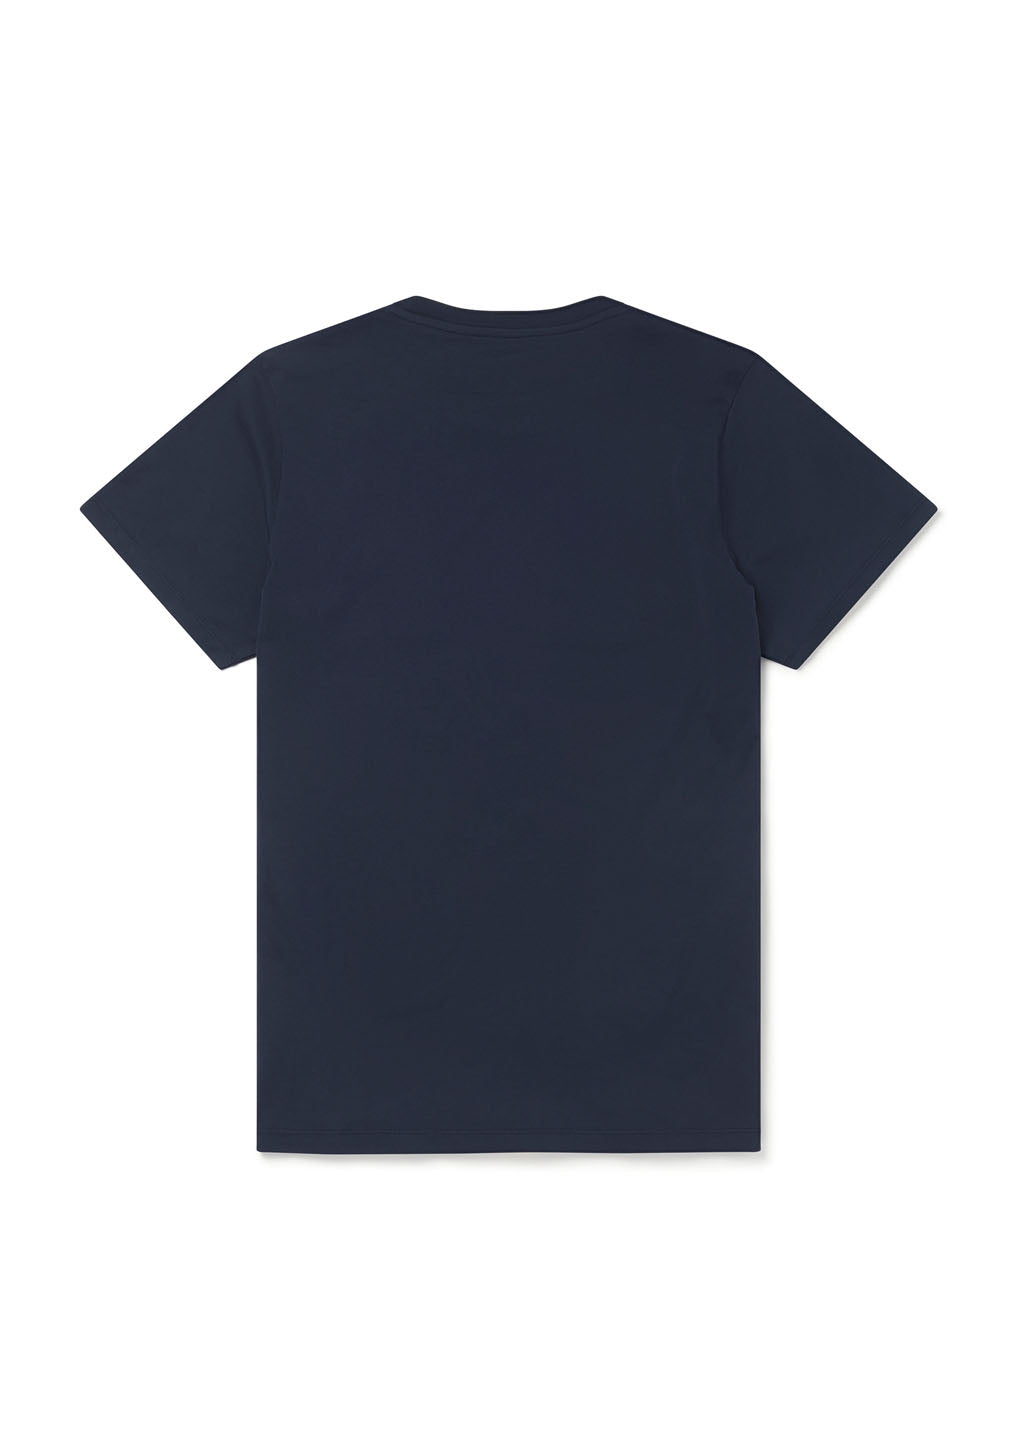 Classic T-Shirt in Navy – albam Clothing